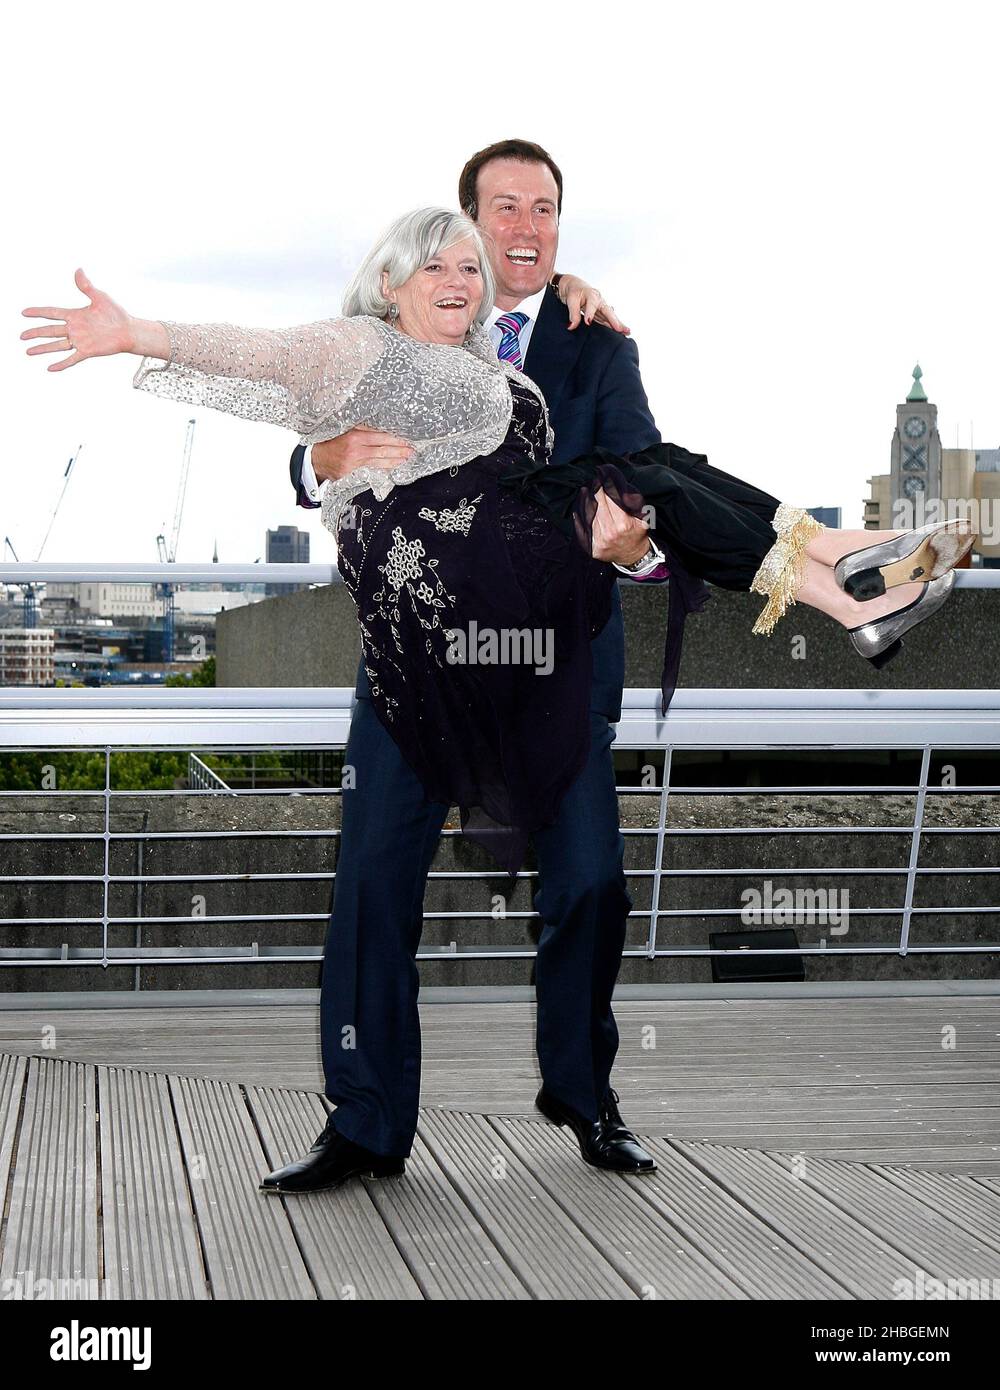 Ann Widdecombe and Anton du Beke launch Bupa's Shall We Dance campaign, highlighting the health benefits of dancing to over 75s, at the National Theatre, South Bank, London. The campaign is calling for communities to contact their local care home to help get 30,000 people dancing in June after a Bupa report highlighted how dance can help improve mental and physical wellbeing and aid in the treatment of conditions like dementia and Parkinson's. Stock Photo